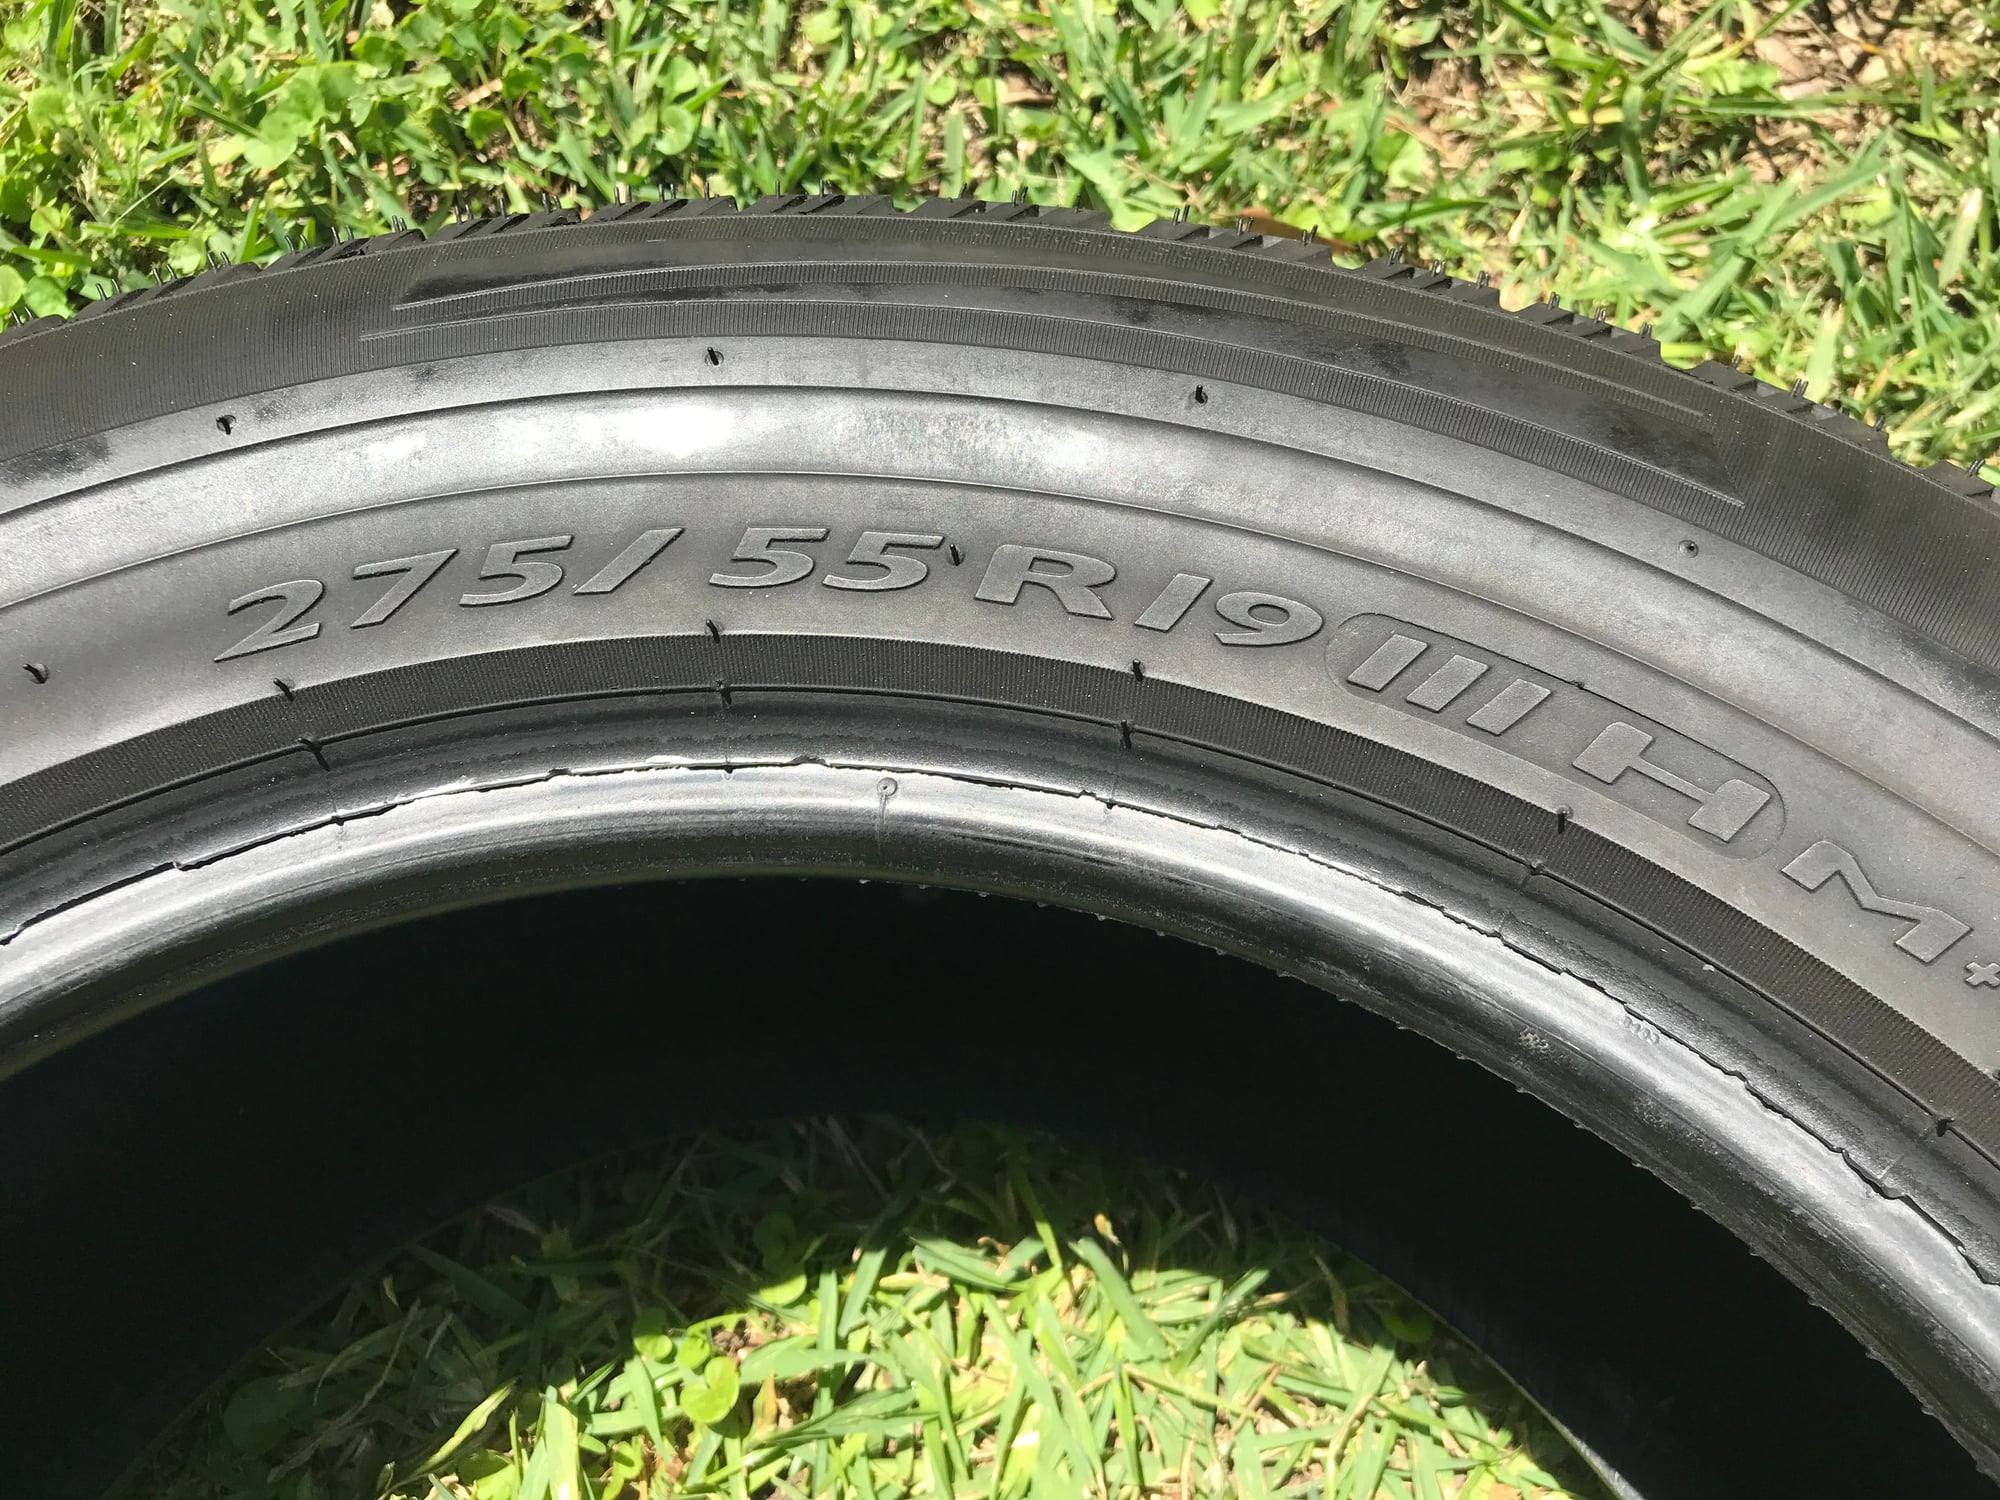 Wheels and Tires/Axles - Used Pirelli tire - Mercedes GL OEM/SUV 275/55R19 - Used - All Years Mercedes-Benz GL450 - Sugar Land, TX 77479, United States